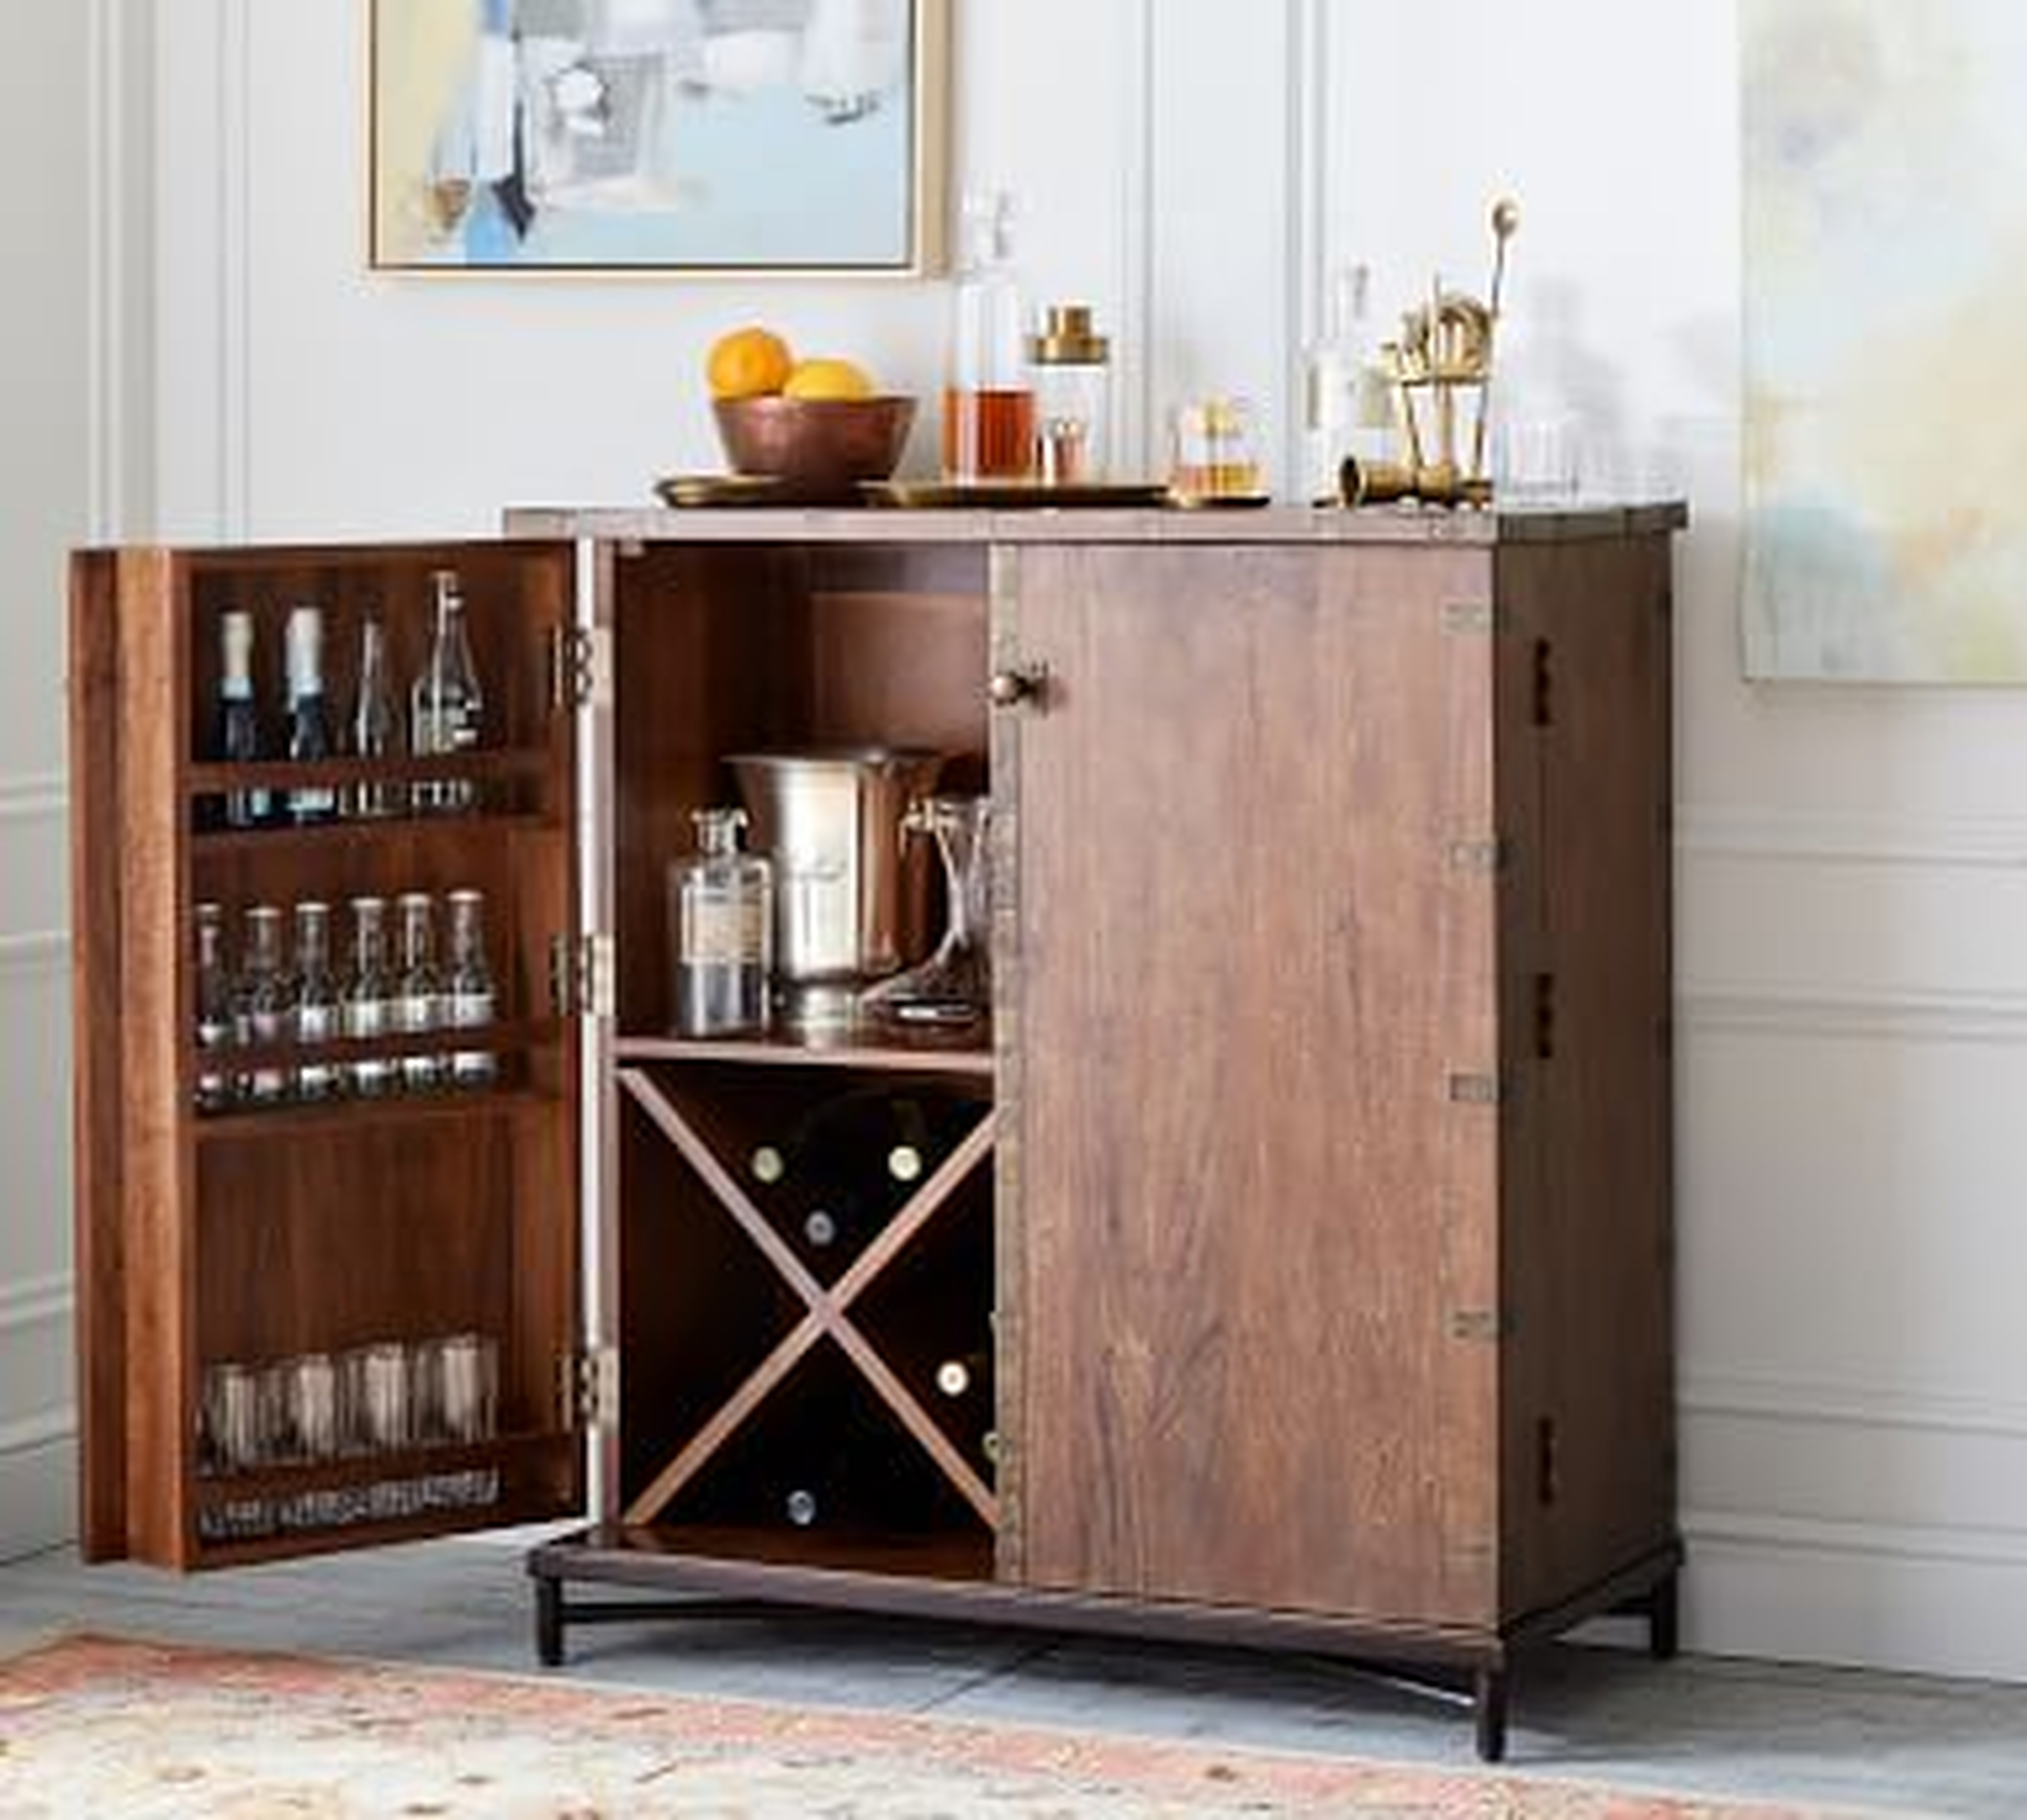 Timor Bar Cabinet, Antique Brown - Pottery Barn